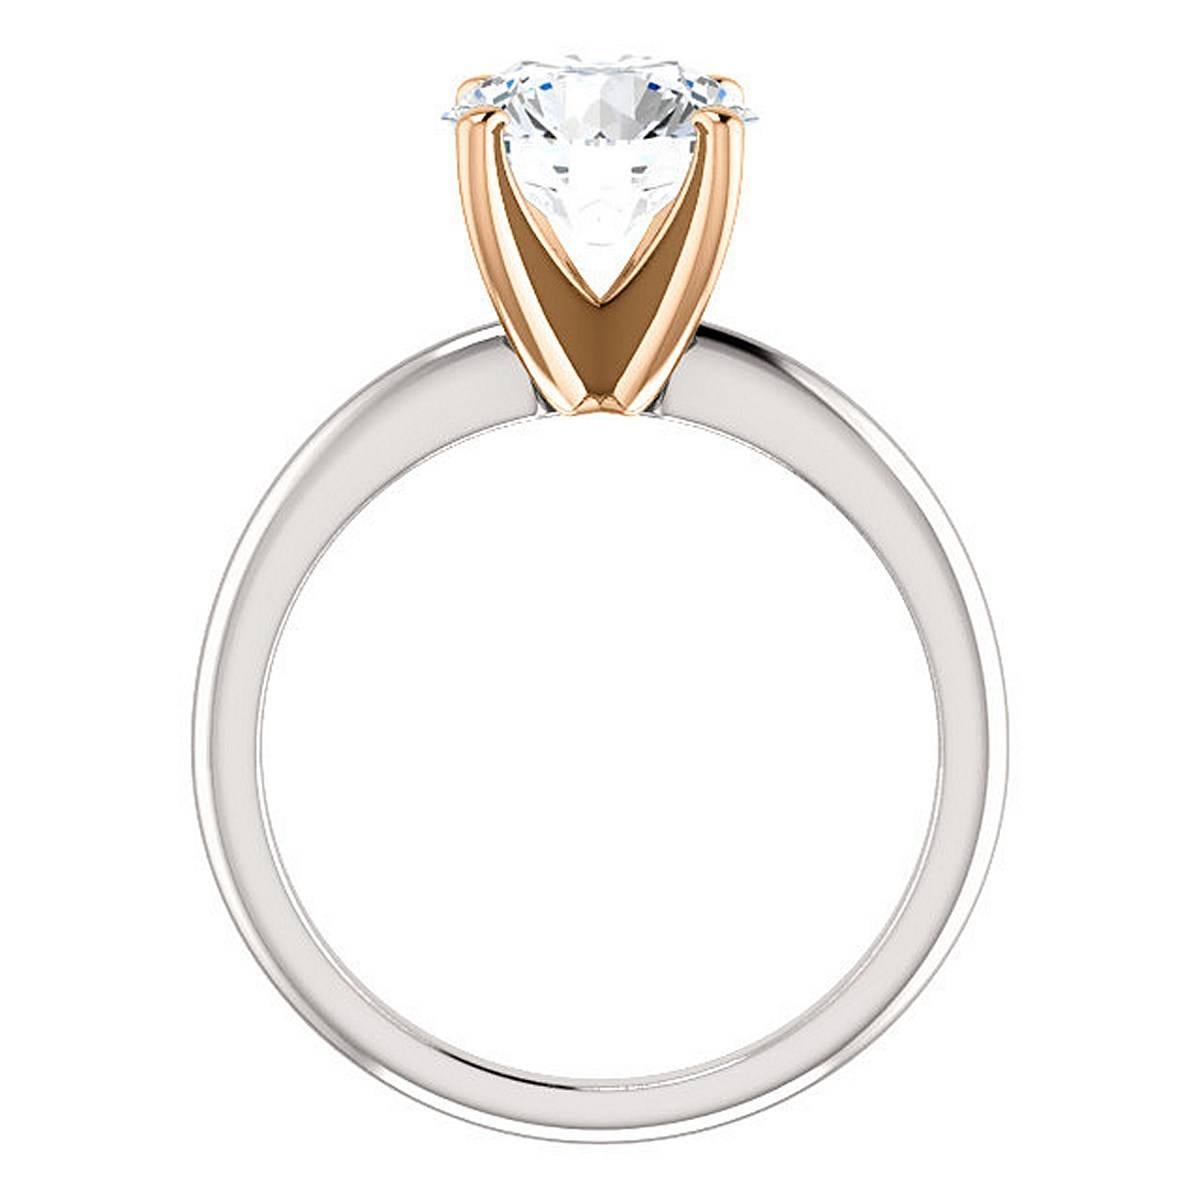 A very fine 2.10 carat Round Brilliant cut diamond in a platinum and 18k rose gold Solitaire ring.
The center stone is E color VS1 clarity set in a chic polished fine platinum ring and 18k rose gold simple four prong solitaire style mounting. GIA